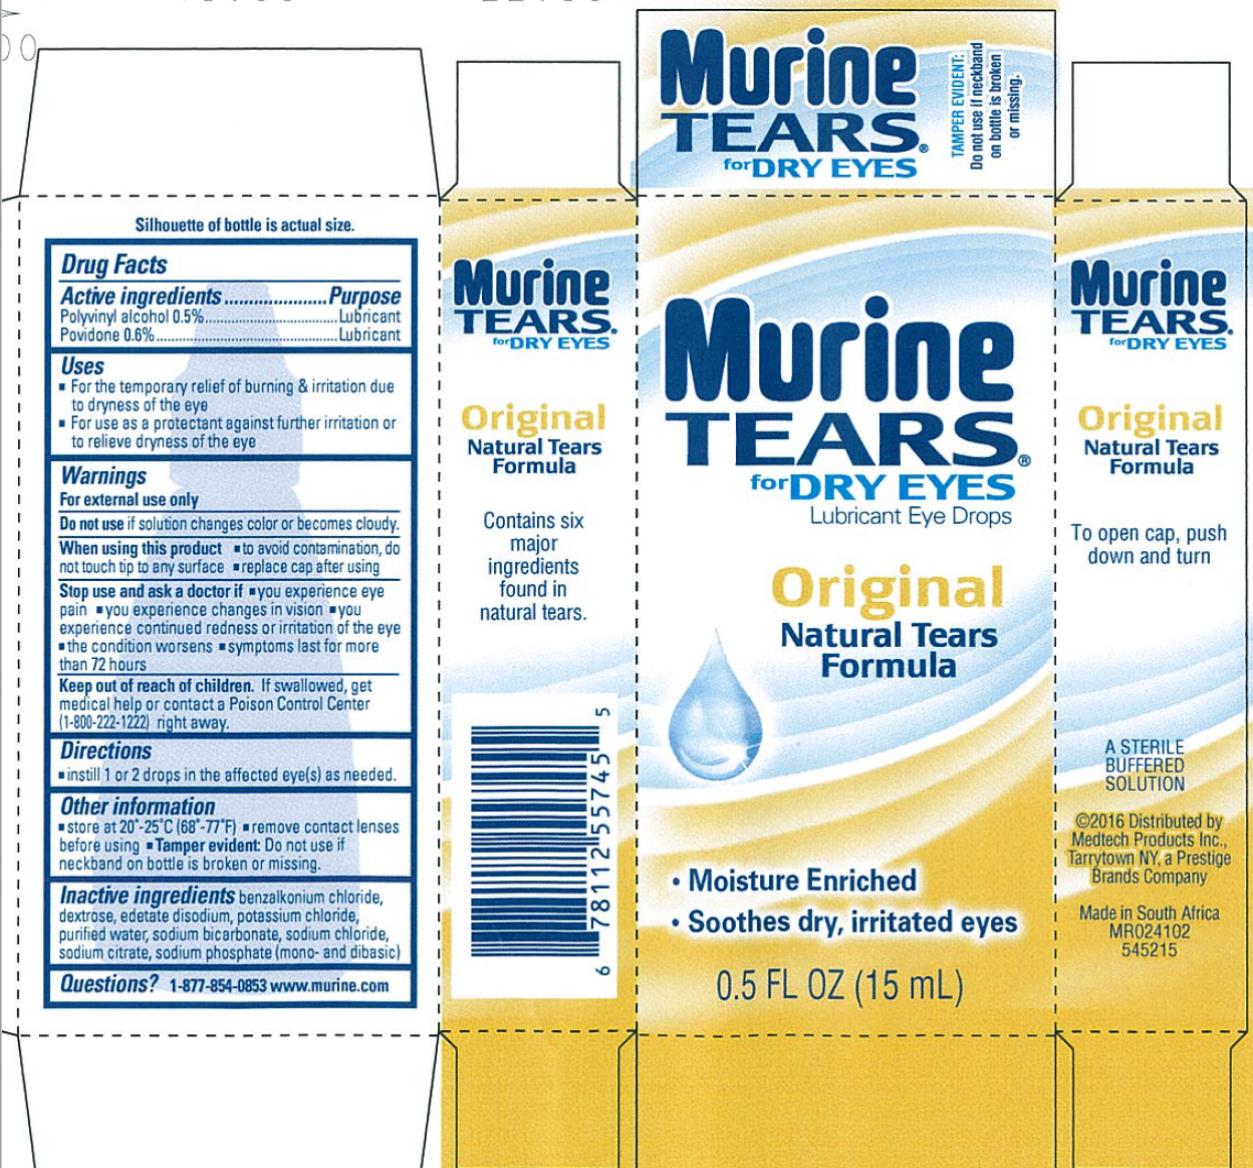 PRINCIPAL DISPLAY PANEL
Murine
Tears® For DRY EYES
Lubricant Eye Drops
Original Natural Tears Formula
● Moisture Enriched
● Eye Doctor Recommended
0.5 fl oz. (15 mL) 
